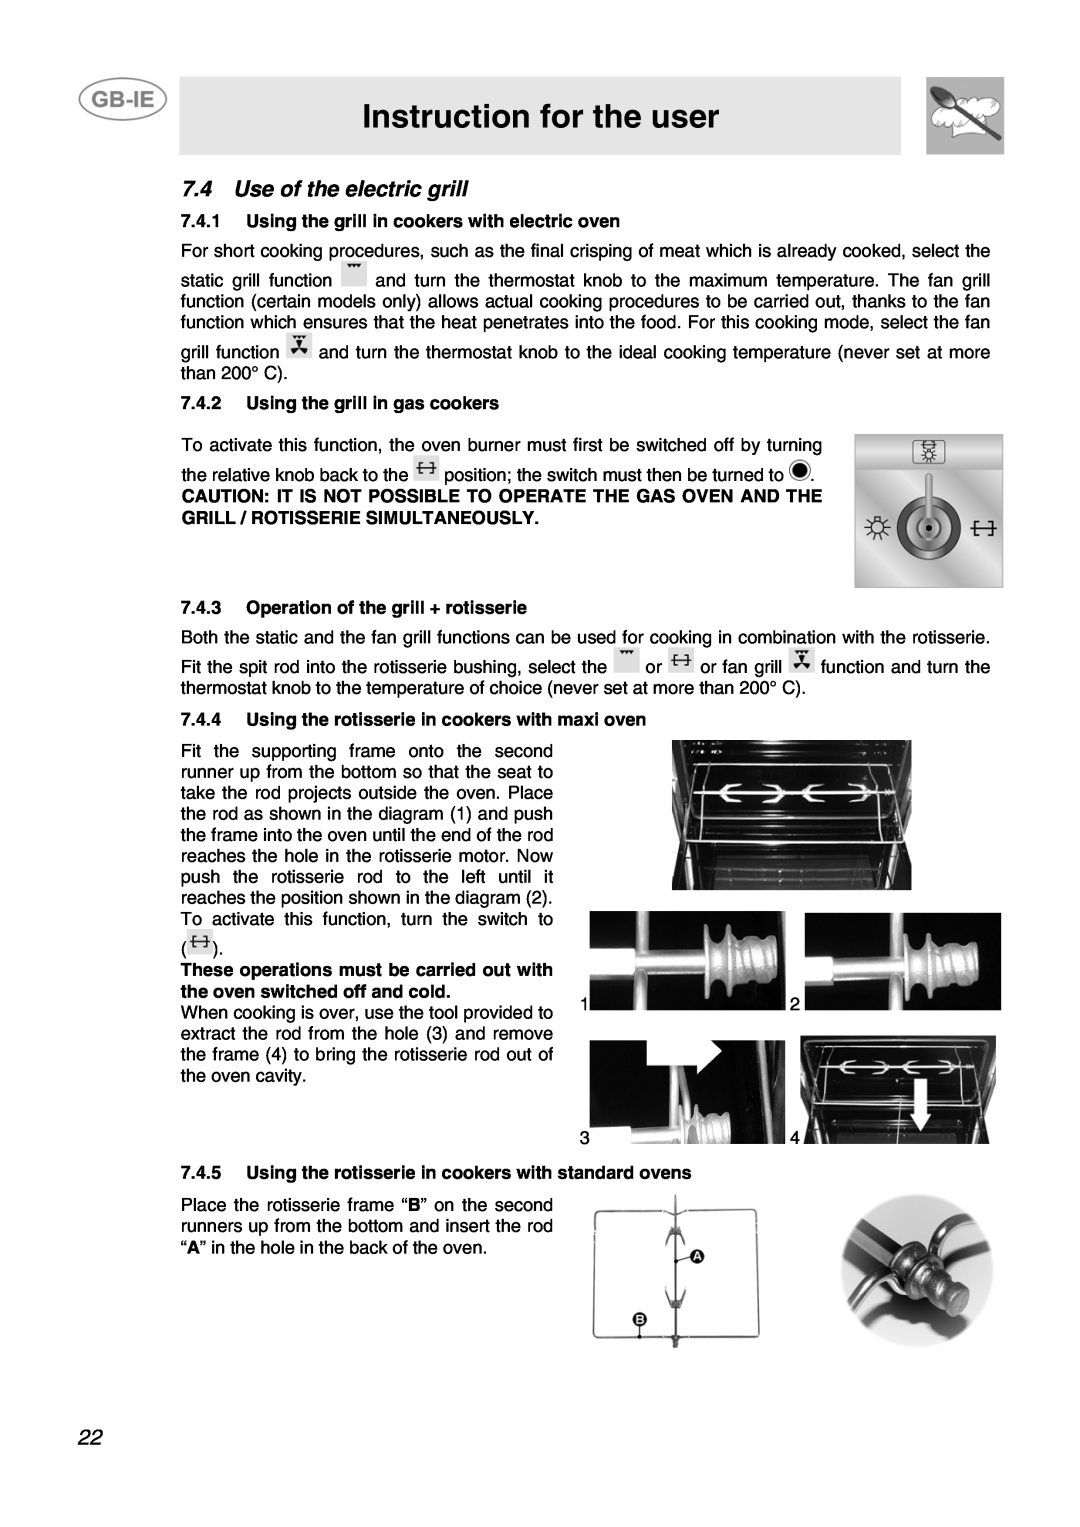 Smeg SCB60MFX5, SCB60GX Use of the electric grill, Instruction for the user, Using the grill in cookers with electric oven 